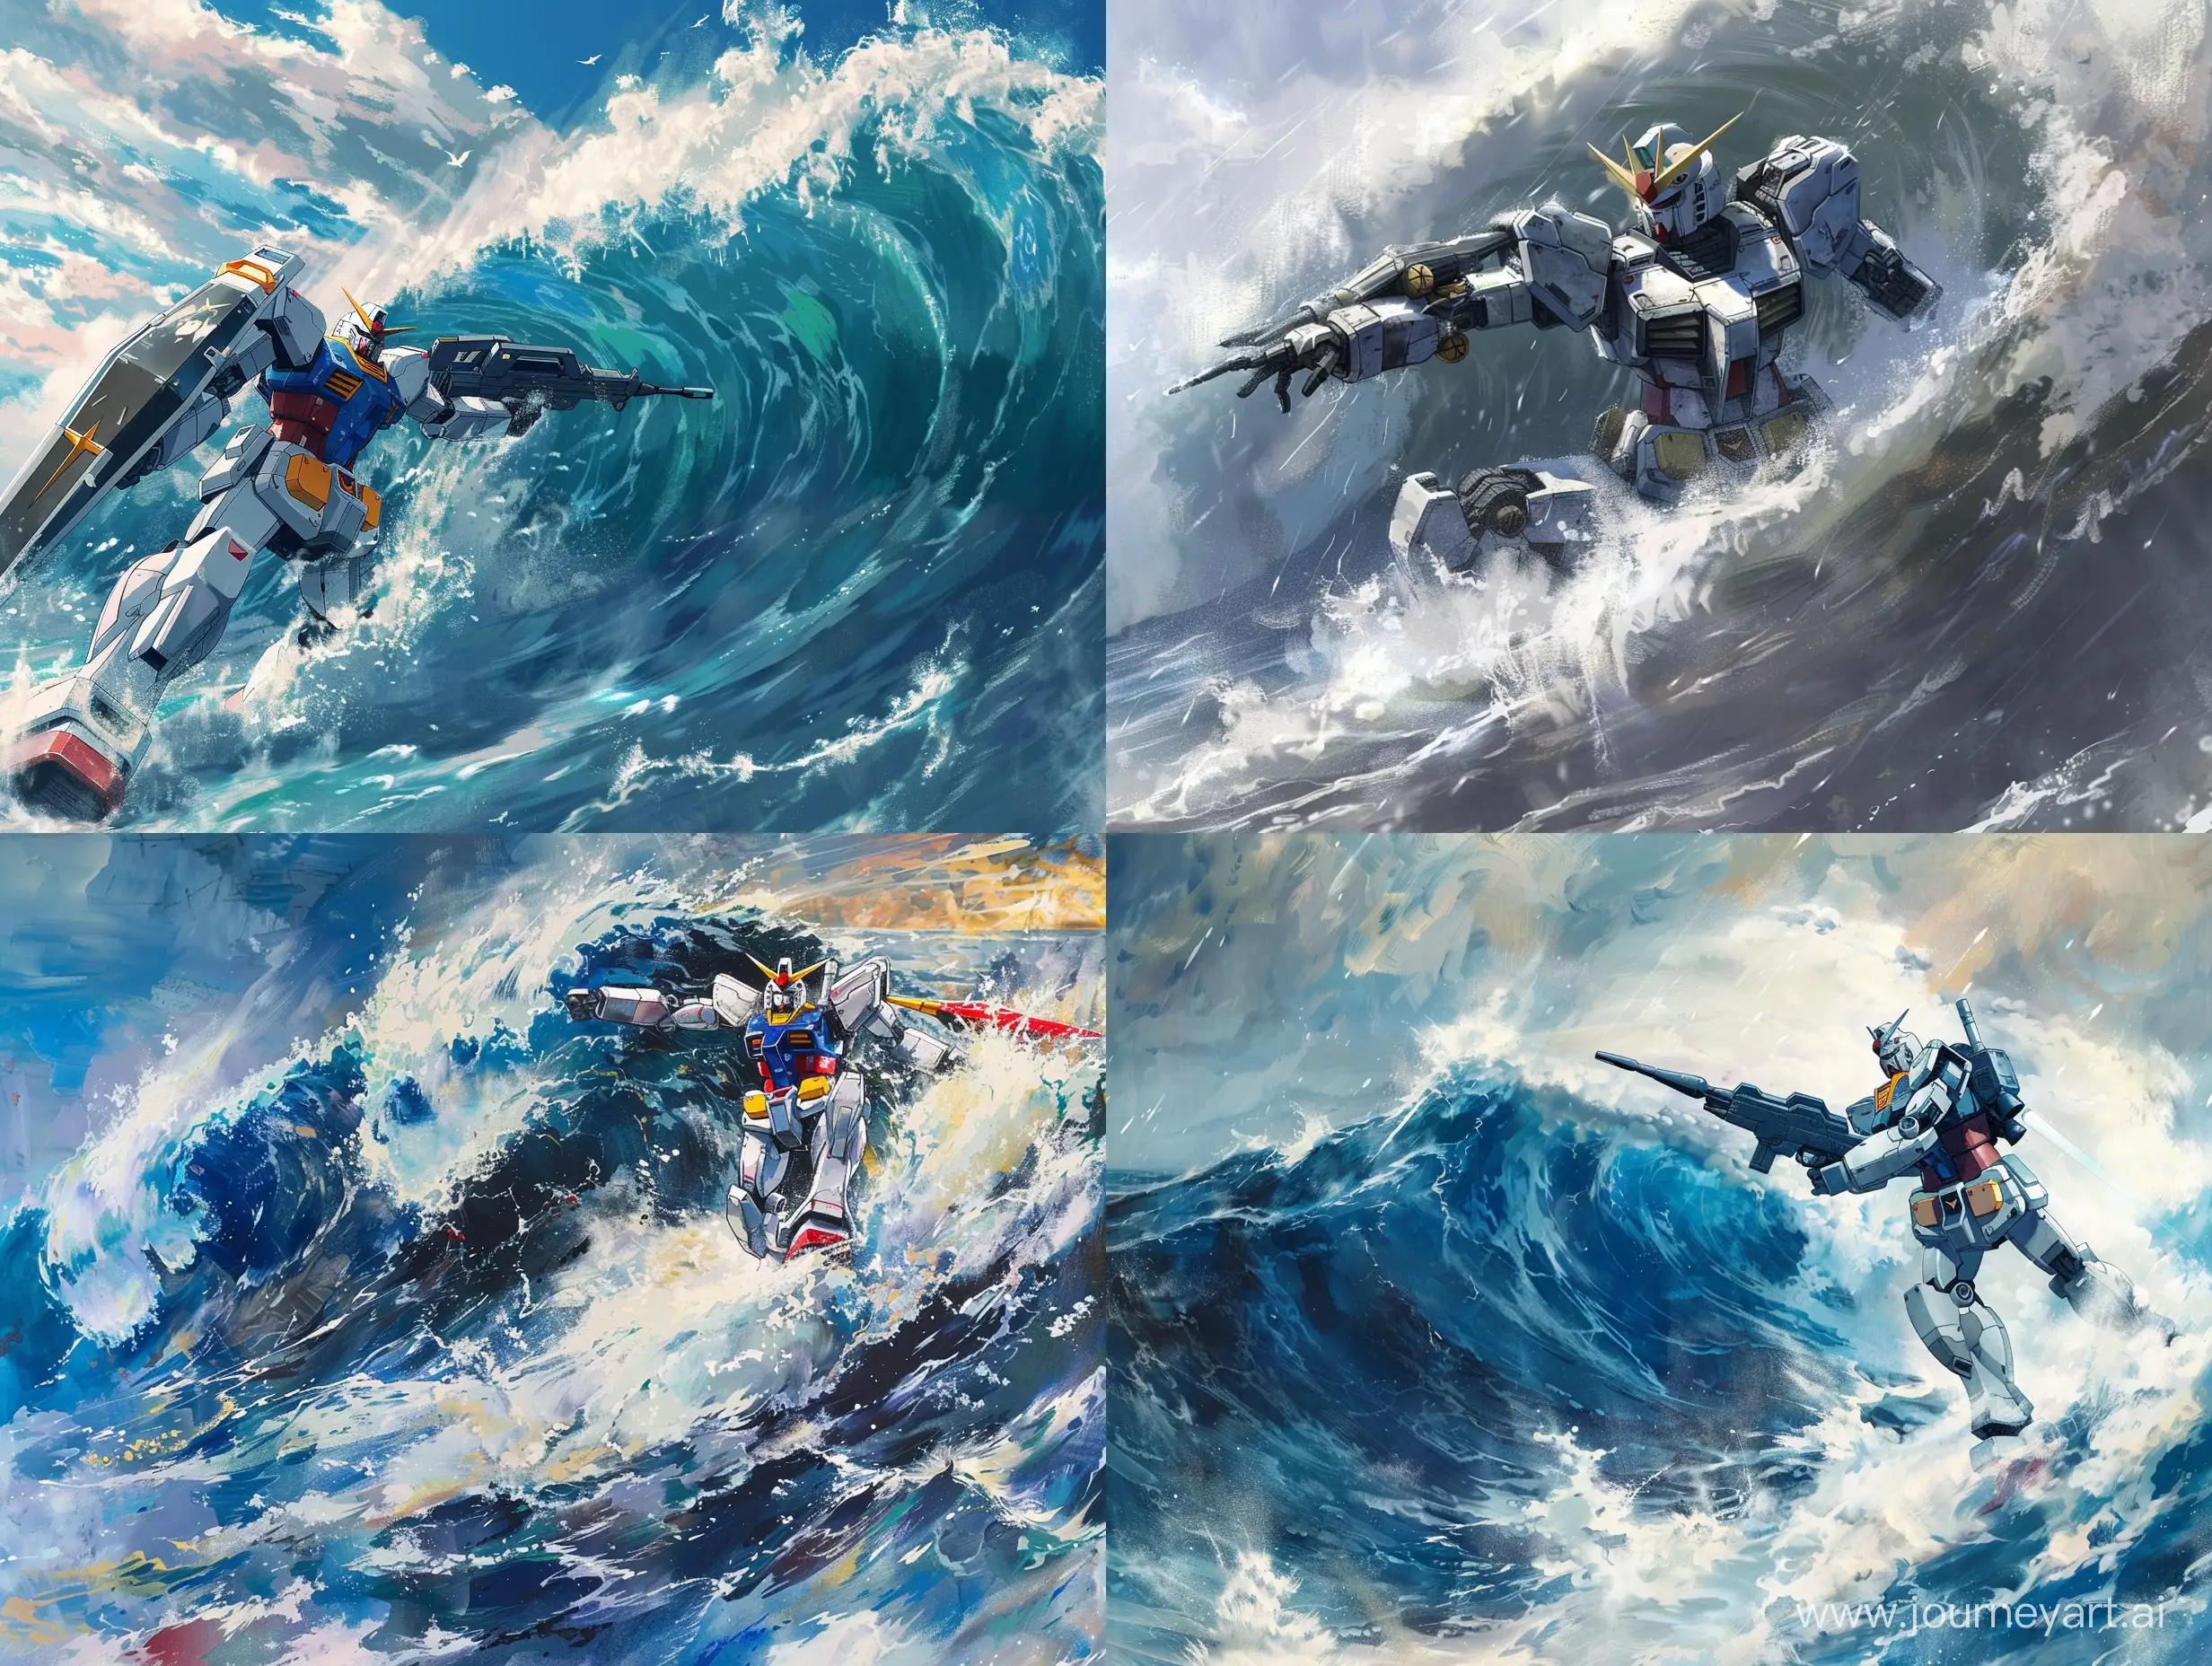 Gundam-Freedom-Battles-the-Surging-Waves-as-the-Savior-of-the-World